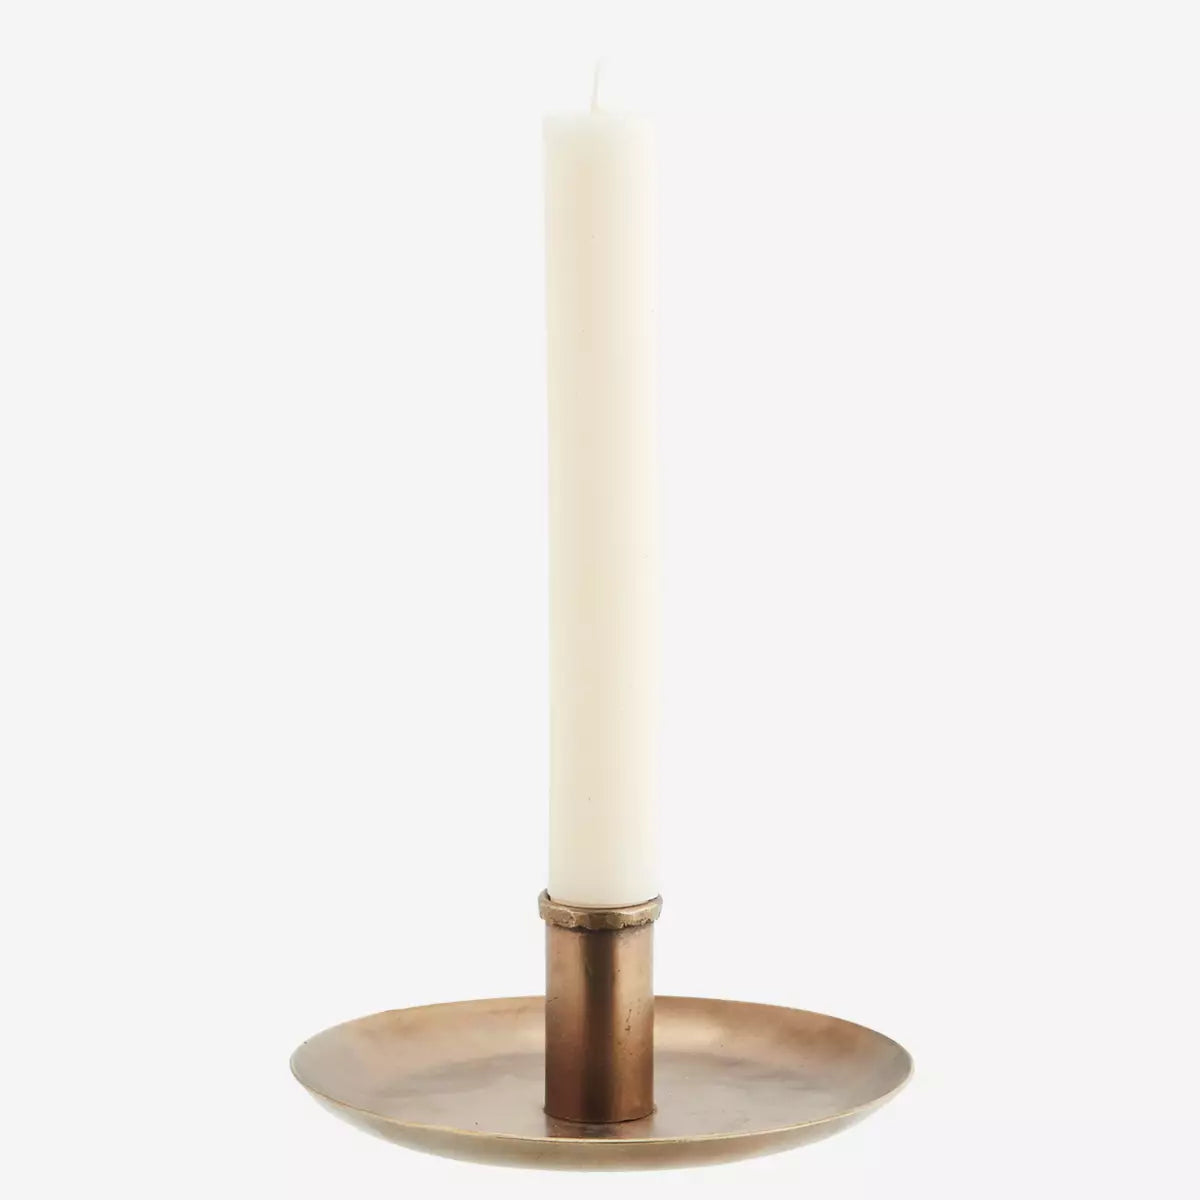 Hand Forged Iron Candle Holder - Gold